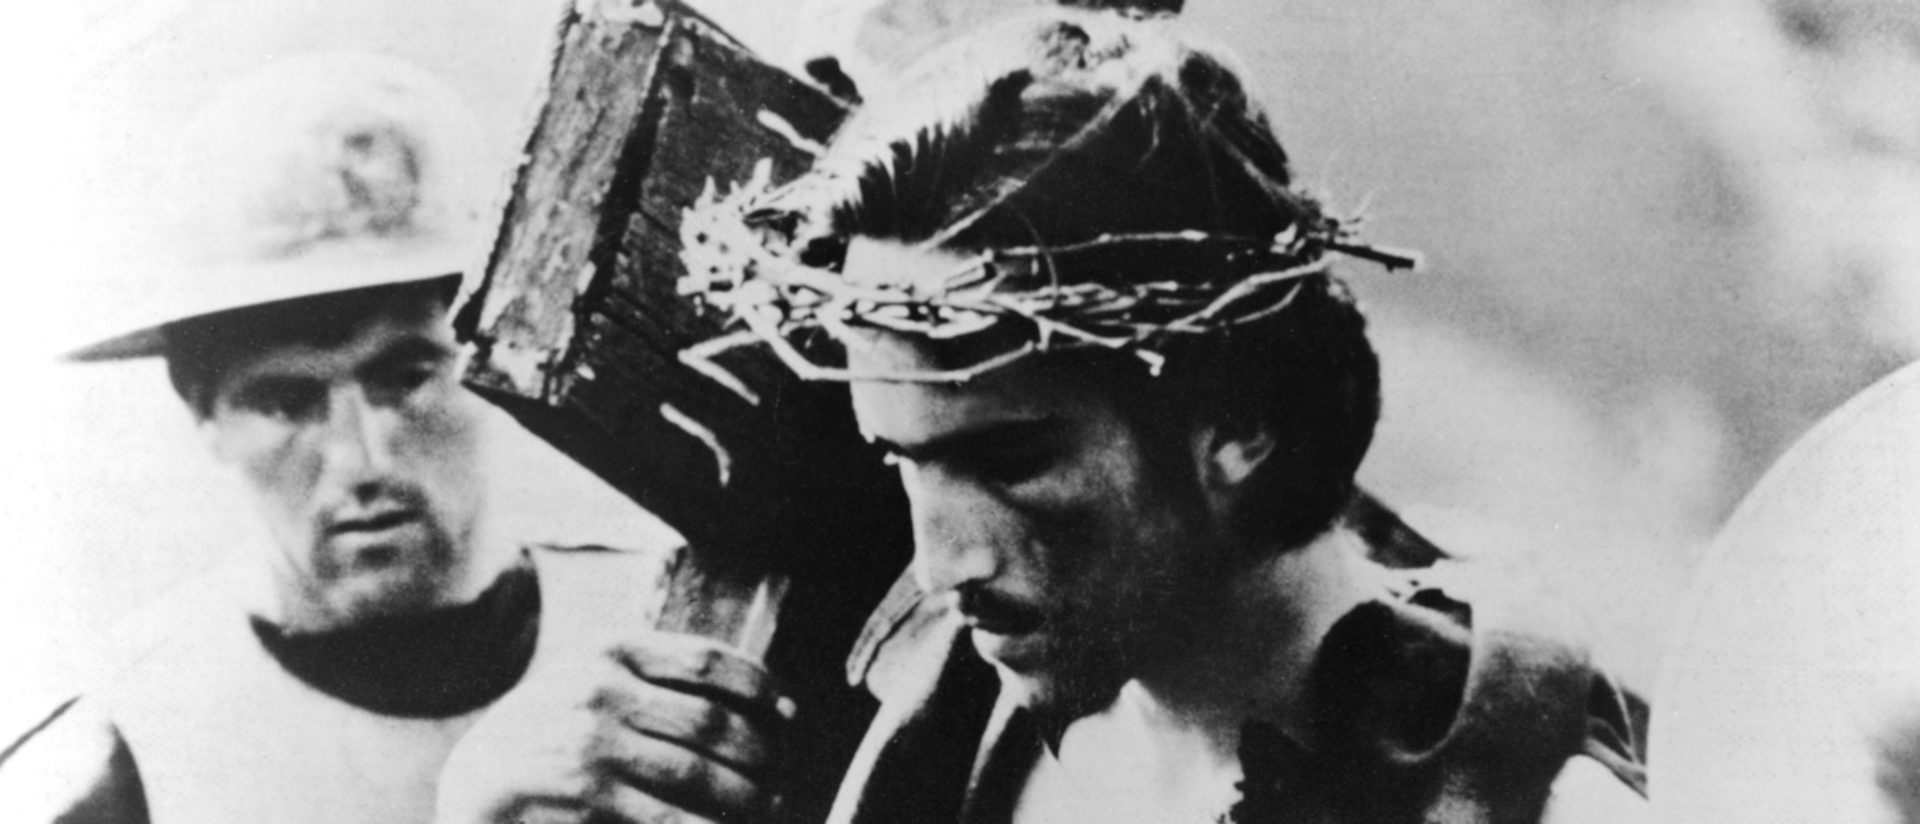 Scene from Pasolini's adaptation of the Bible